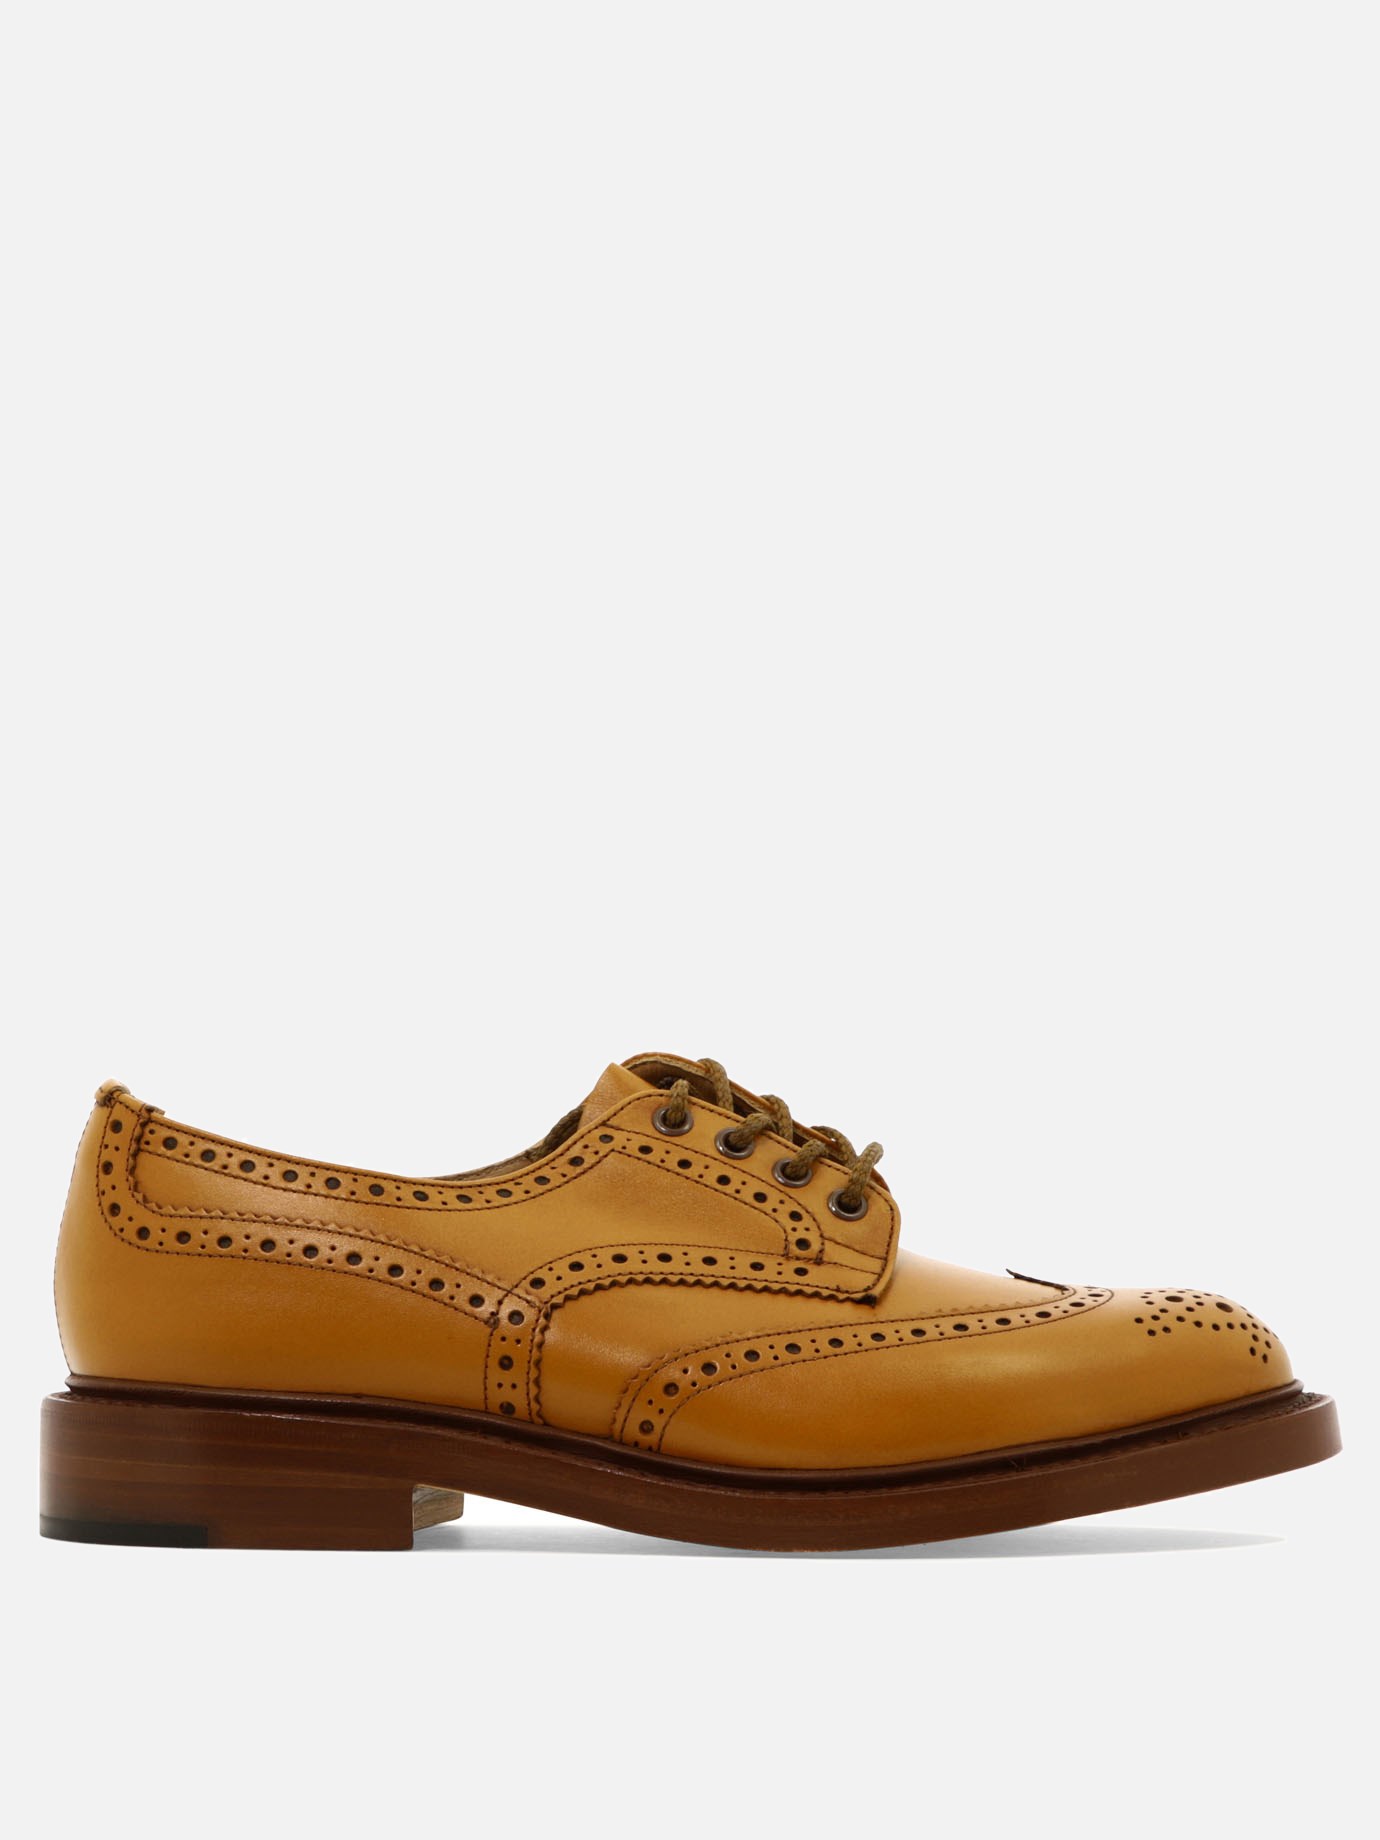  Bourton  lace-up shoesby Tricker's - 4